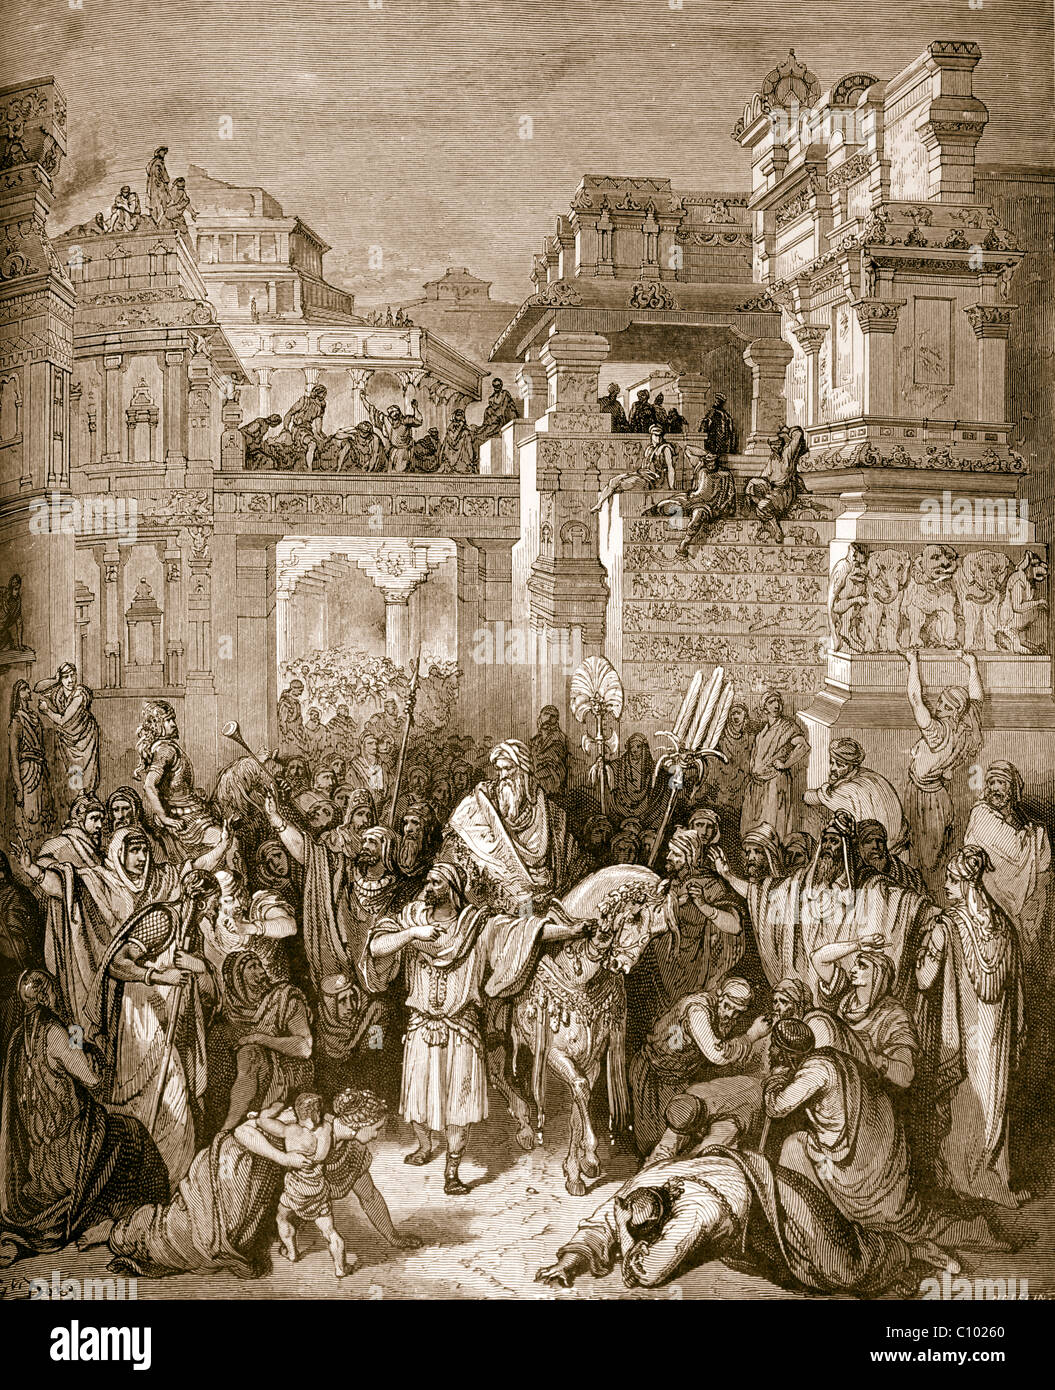 Bible Illustration Of Triumph of Mordecai By Gustave Dore Book of Esther 6:11 Stock Photo